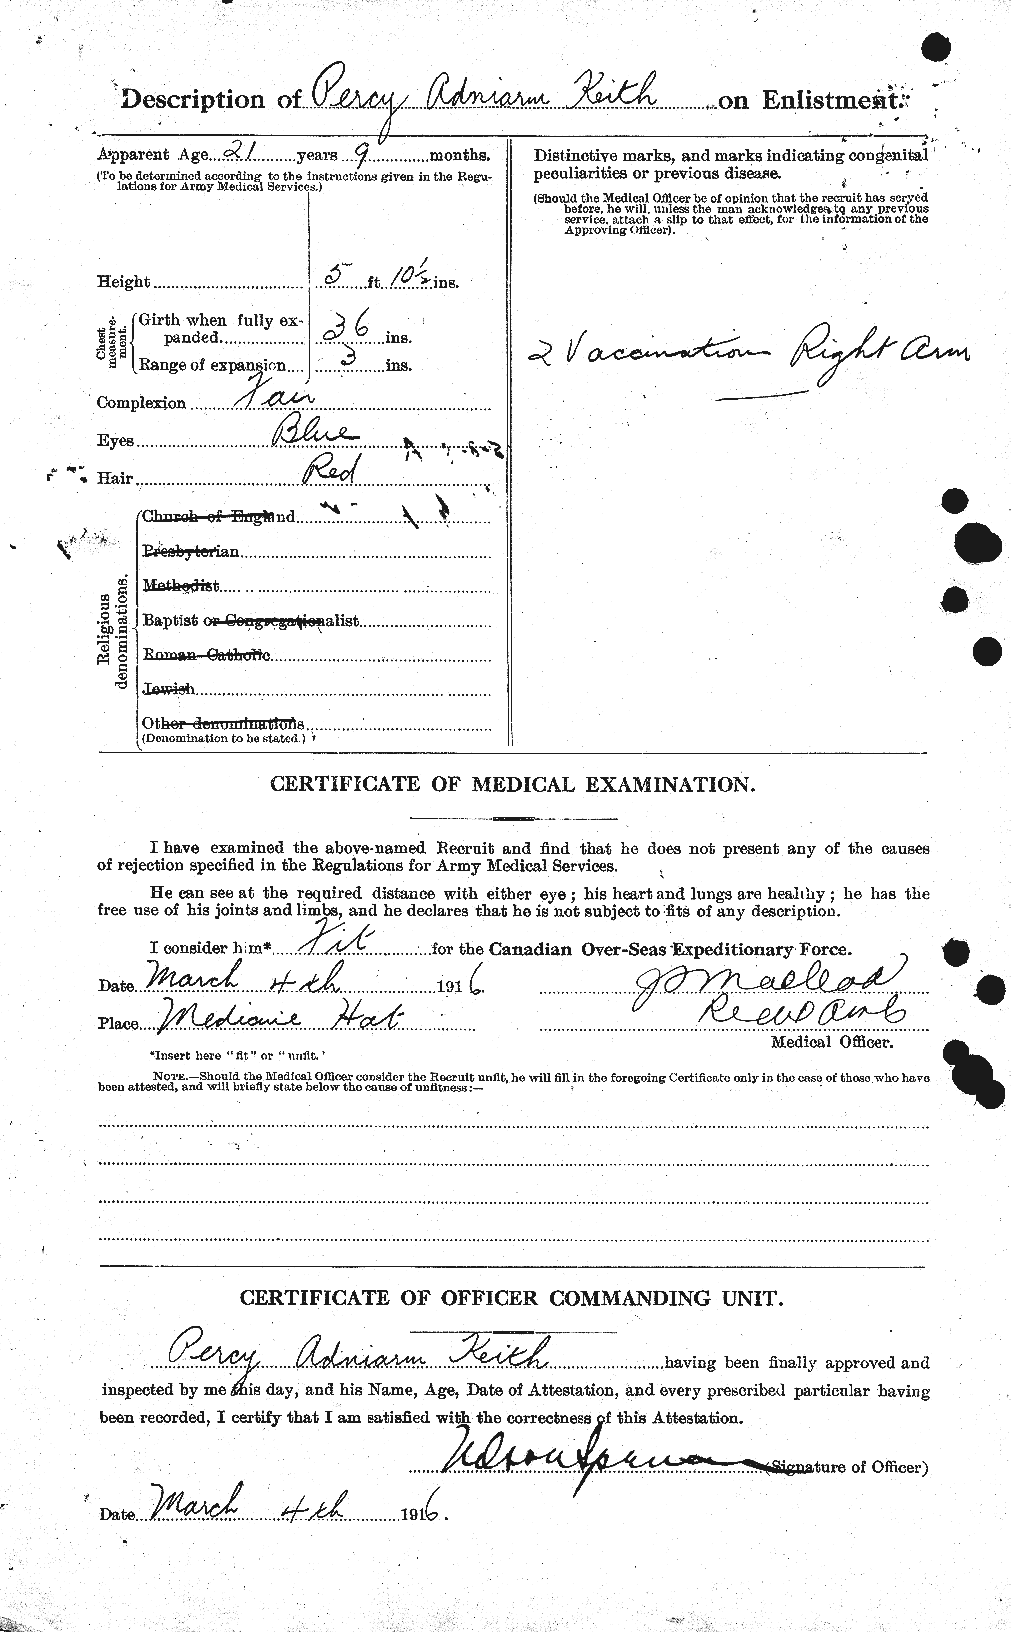 Personnel Records of the First World War - CEF 432489b